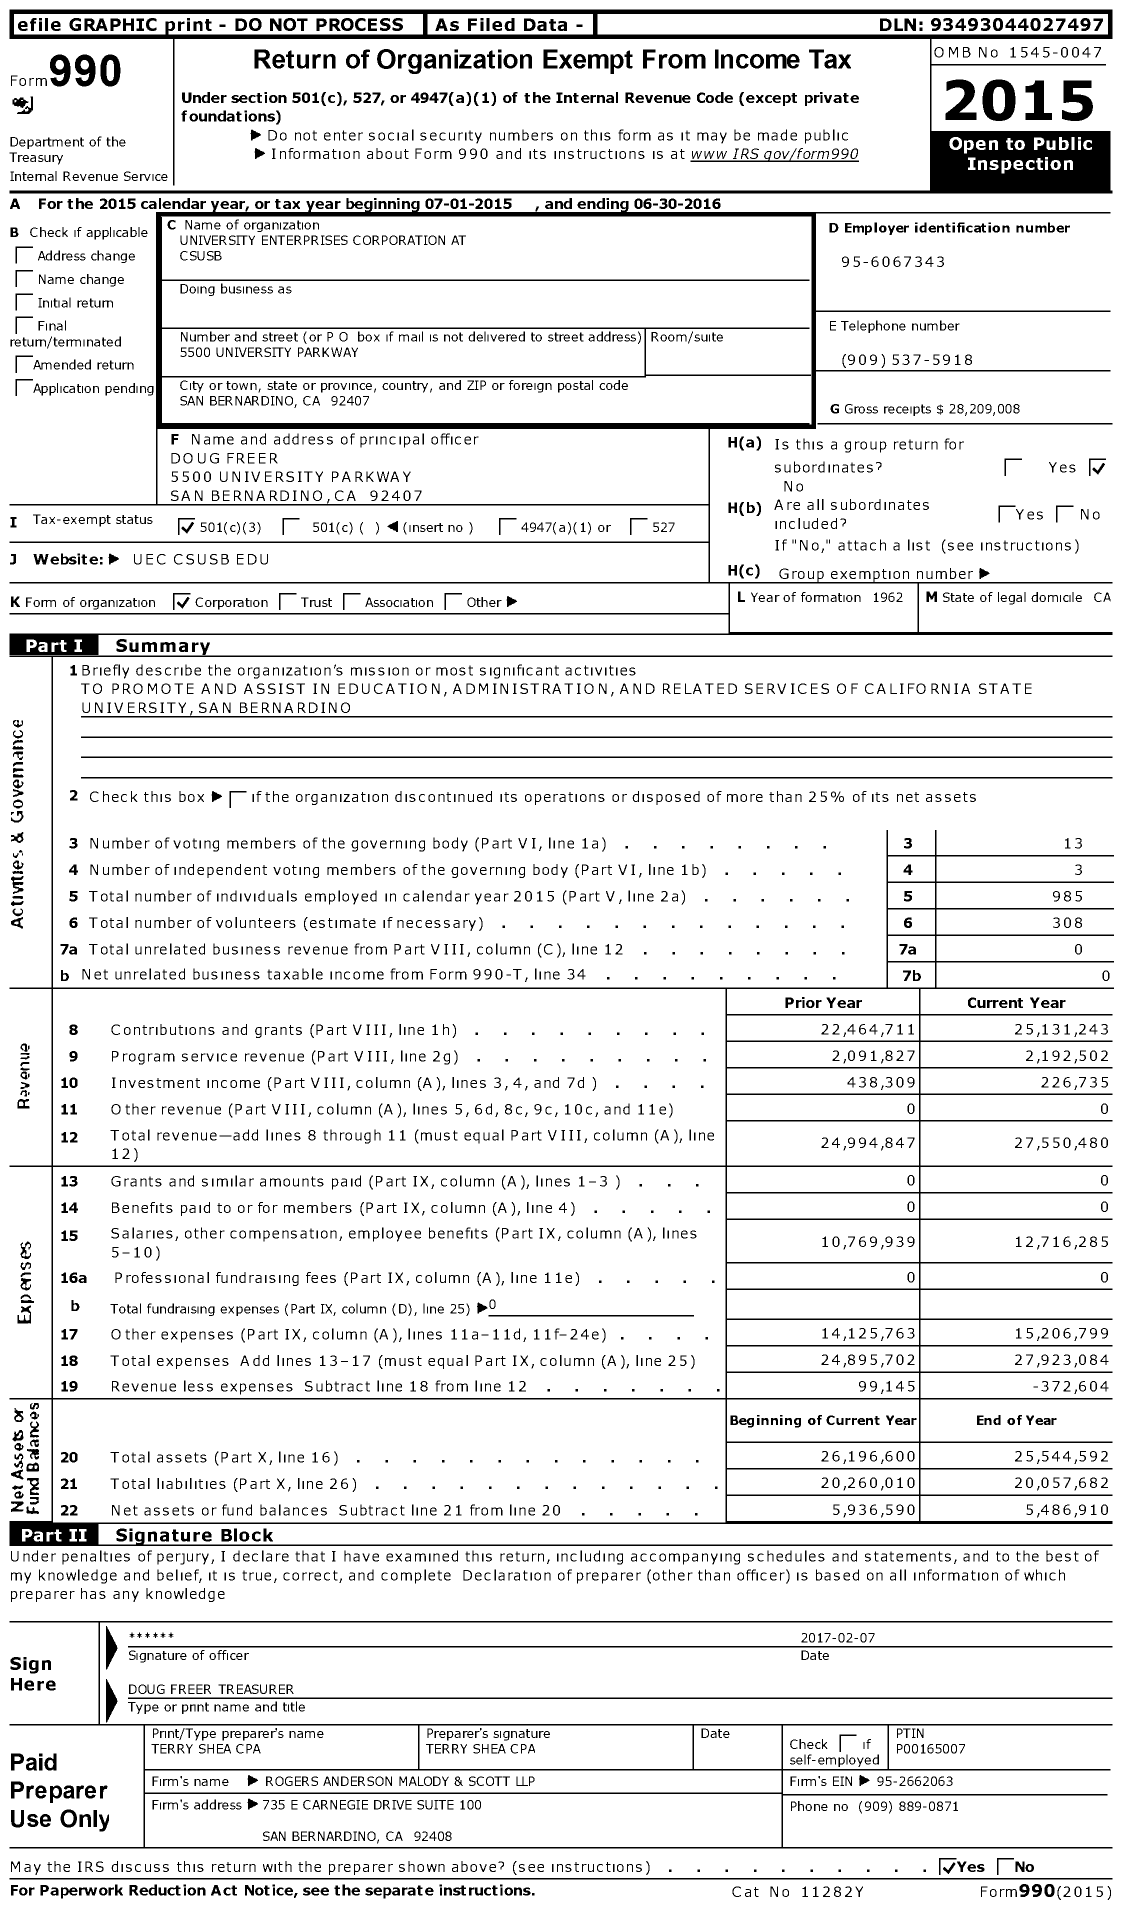 Image of first page of 2015 Form 990 for University Enterprises Corporation at CSUSB (UEC)